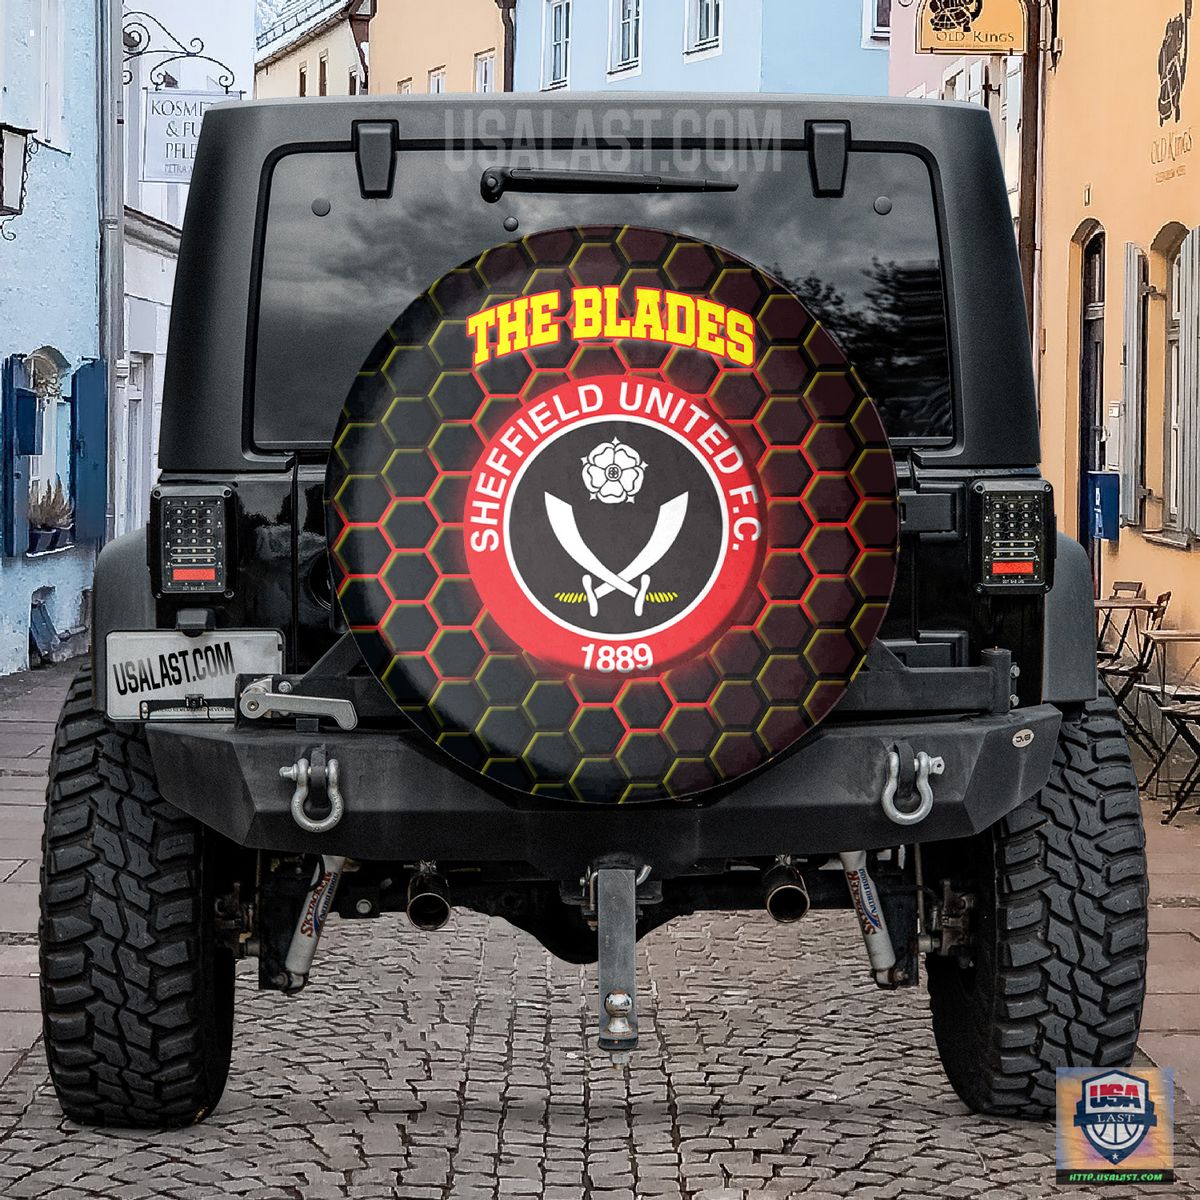 AMAZING Sheffield United FC Spare Tire Cover